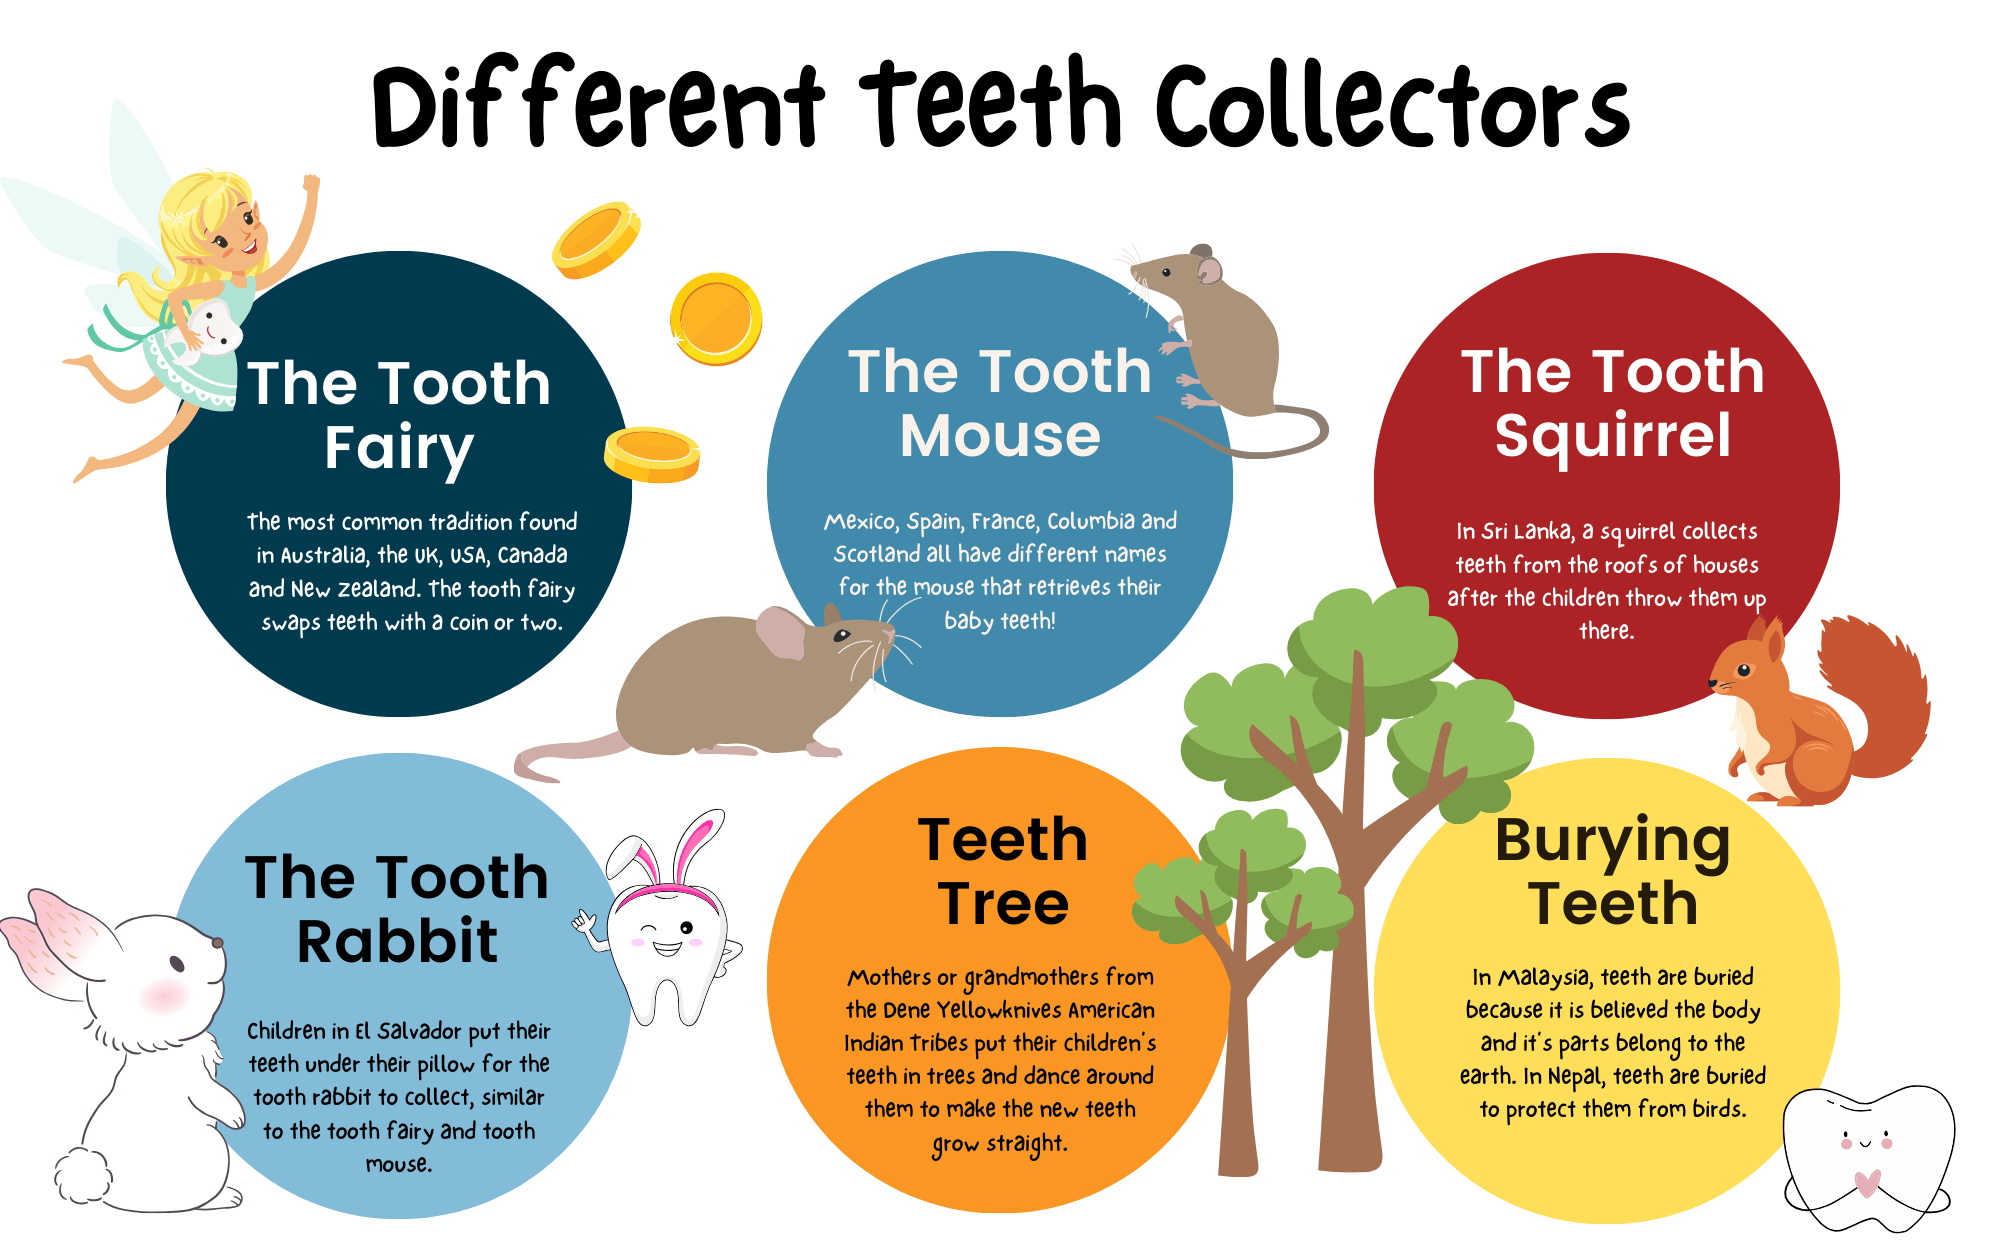 Different teeth collectors around the world - tooth fairy cultural differences.